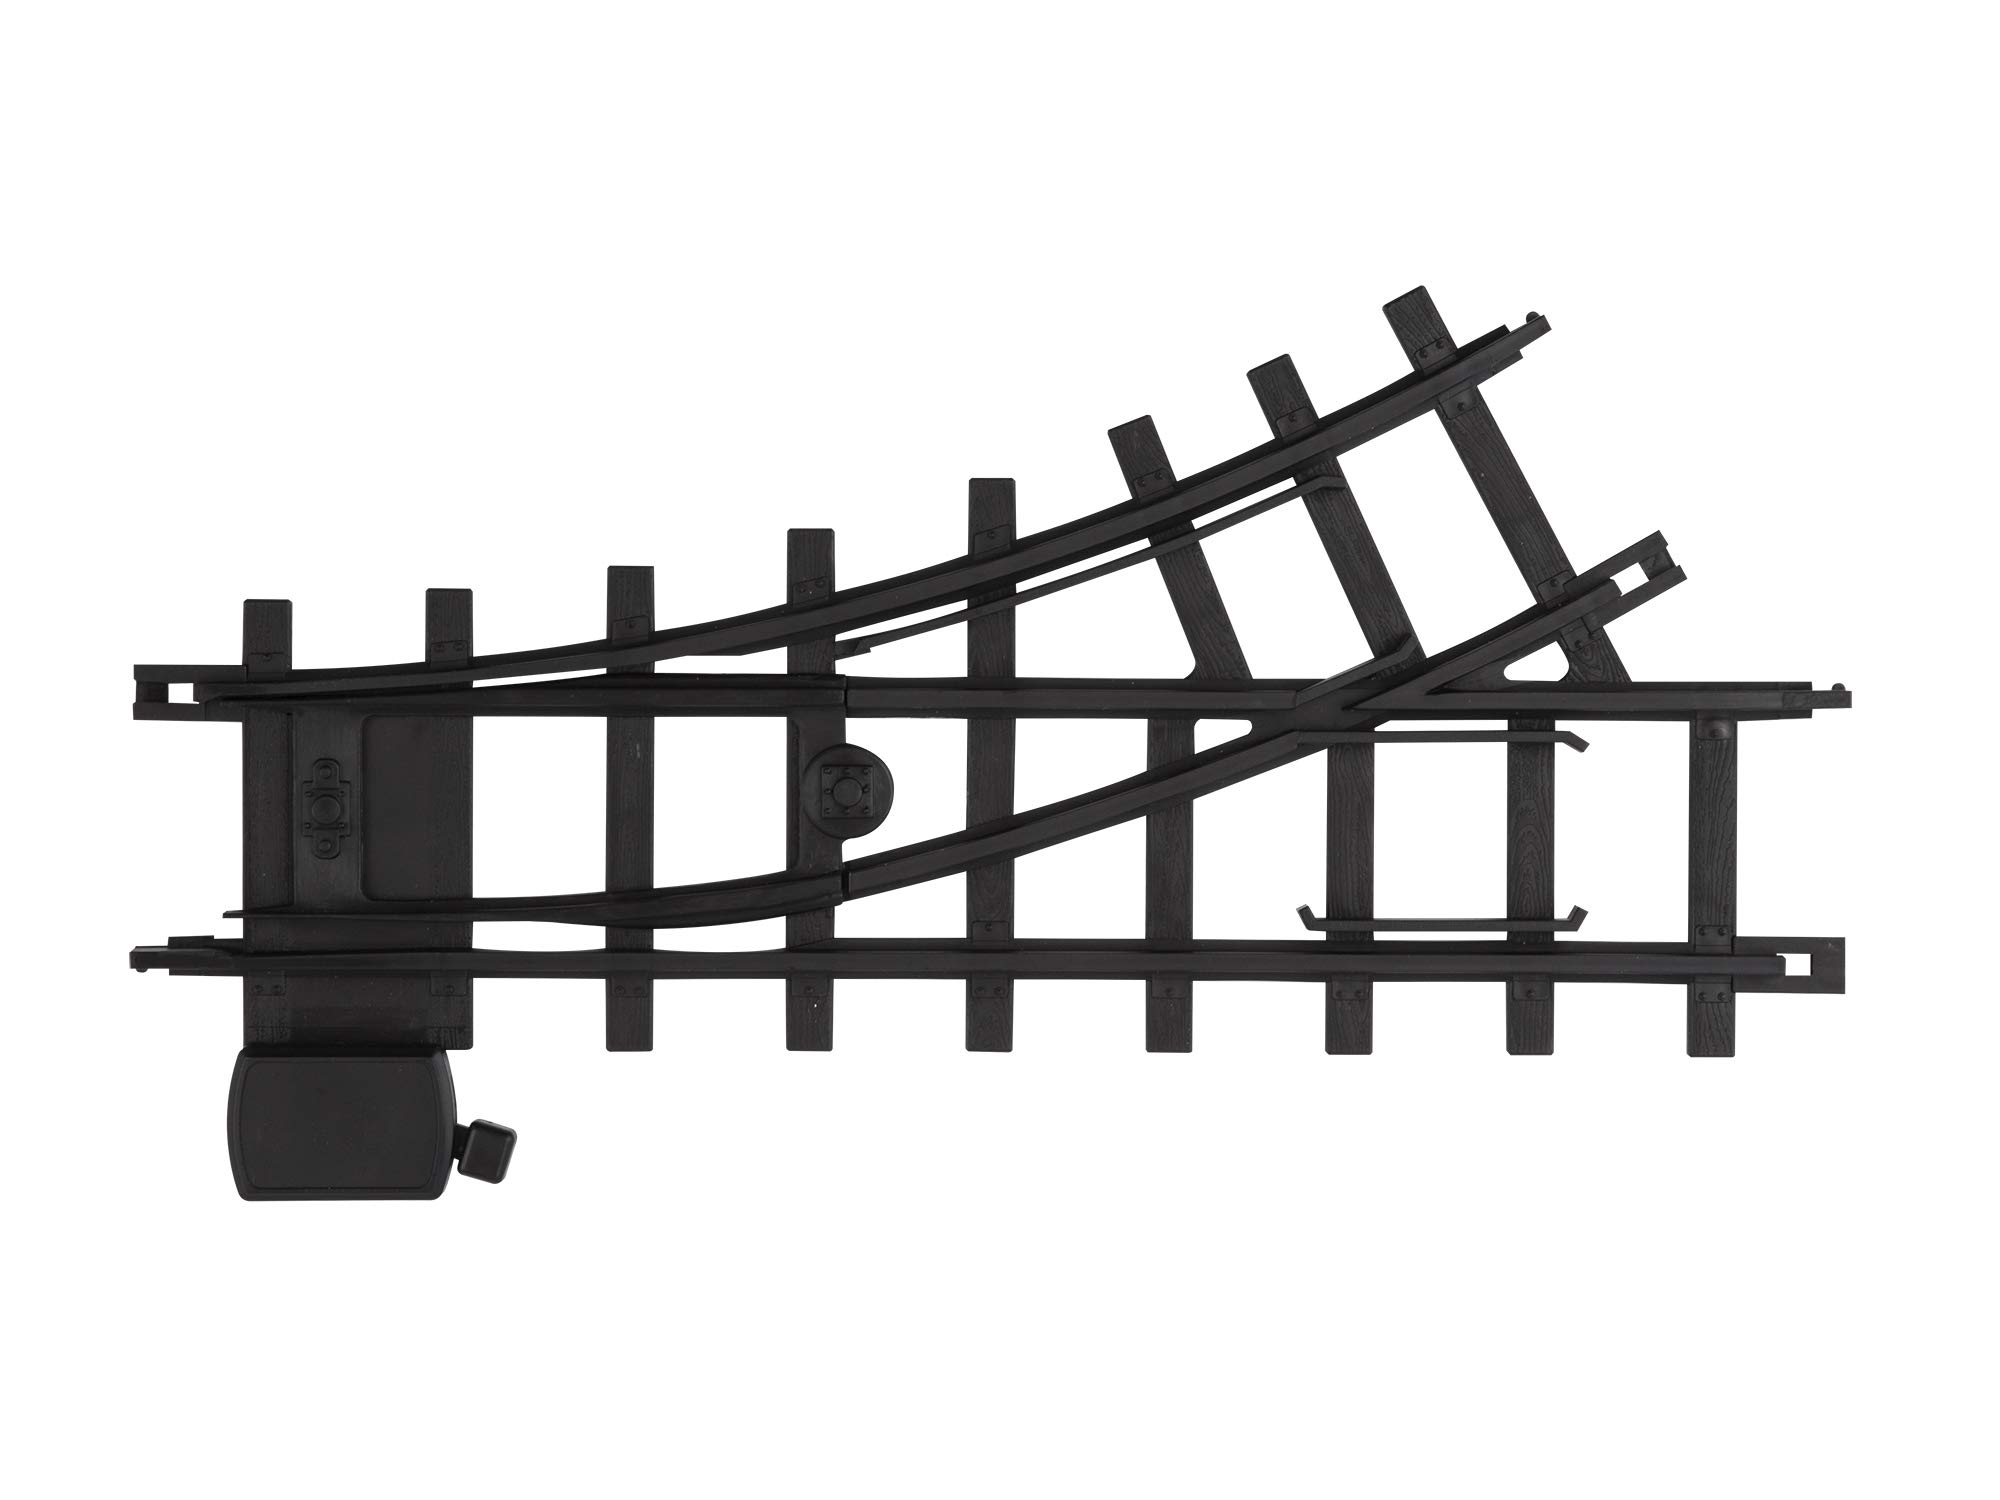 Lionel Ready-to-Play Inner Loop Track Set with 8 Curved Pieces, 1 Left Hand Switch, and 1 Right Hand Switch